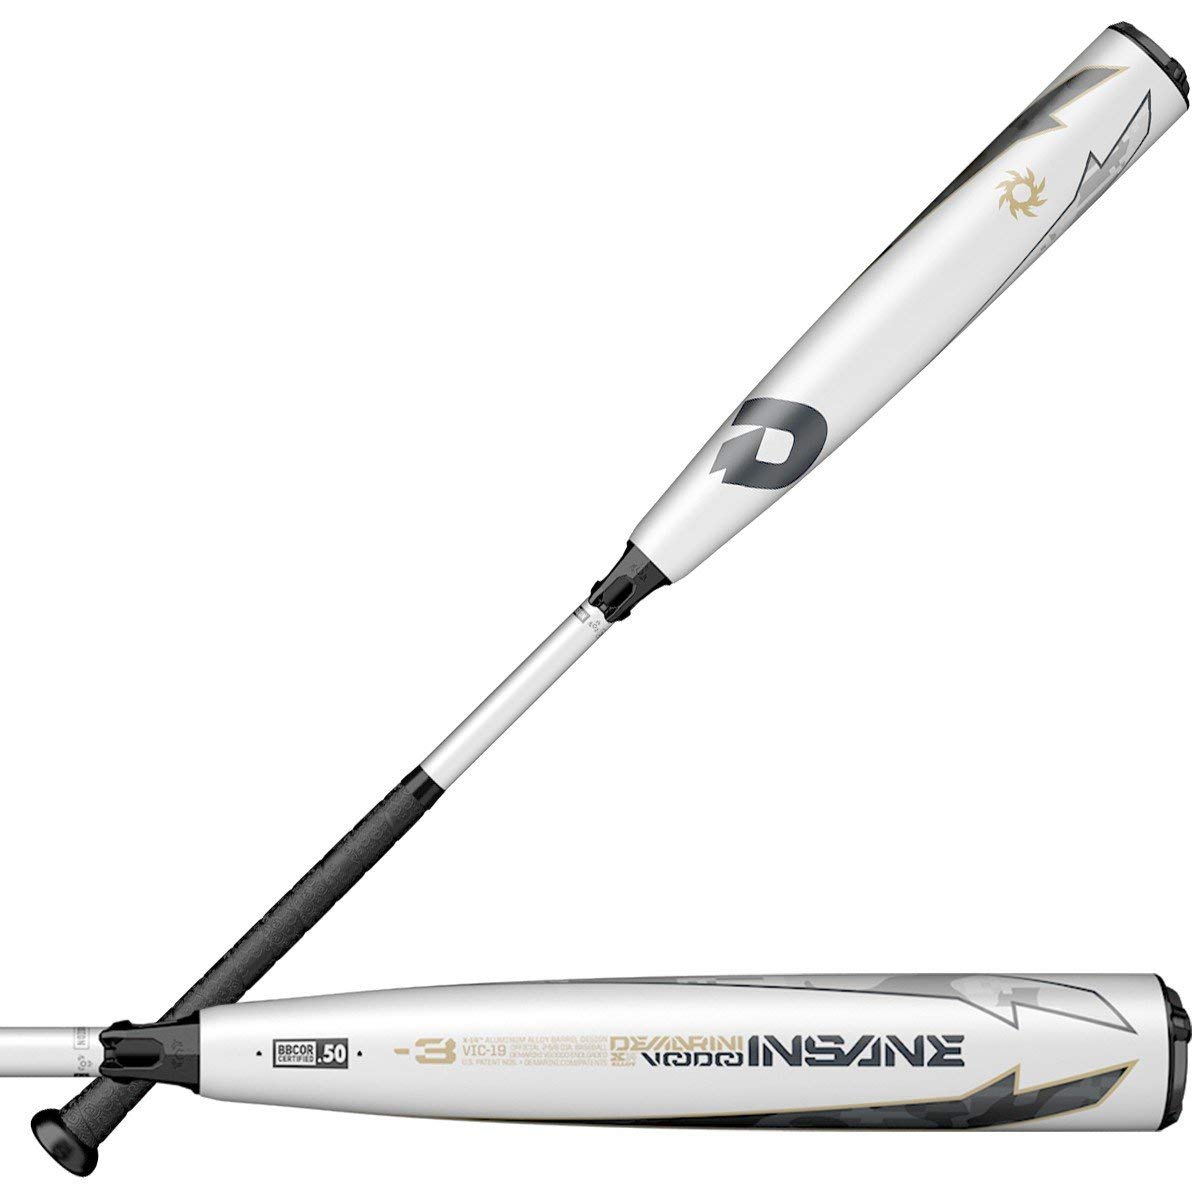 demarini-2019-voodoo-insane-3bbcor-baseball-bat-32-inch-29-oz WTDXVIC2932-19 DeMarini 887768692629 `-3 Length to weight ratio End-loaded swing weight Paraflex Plus composite